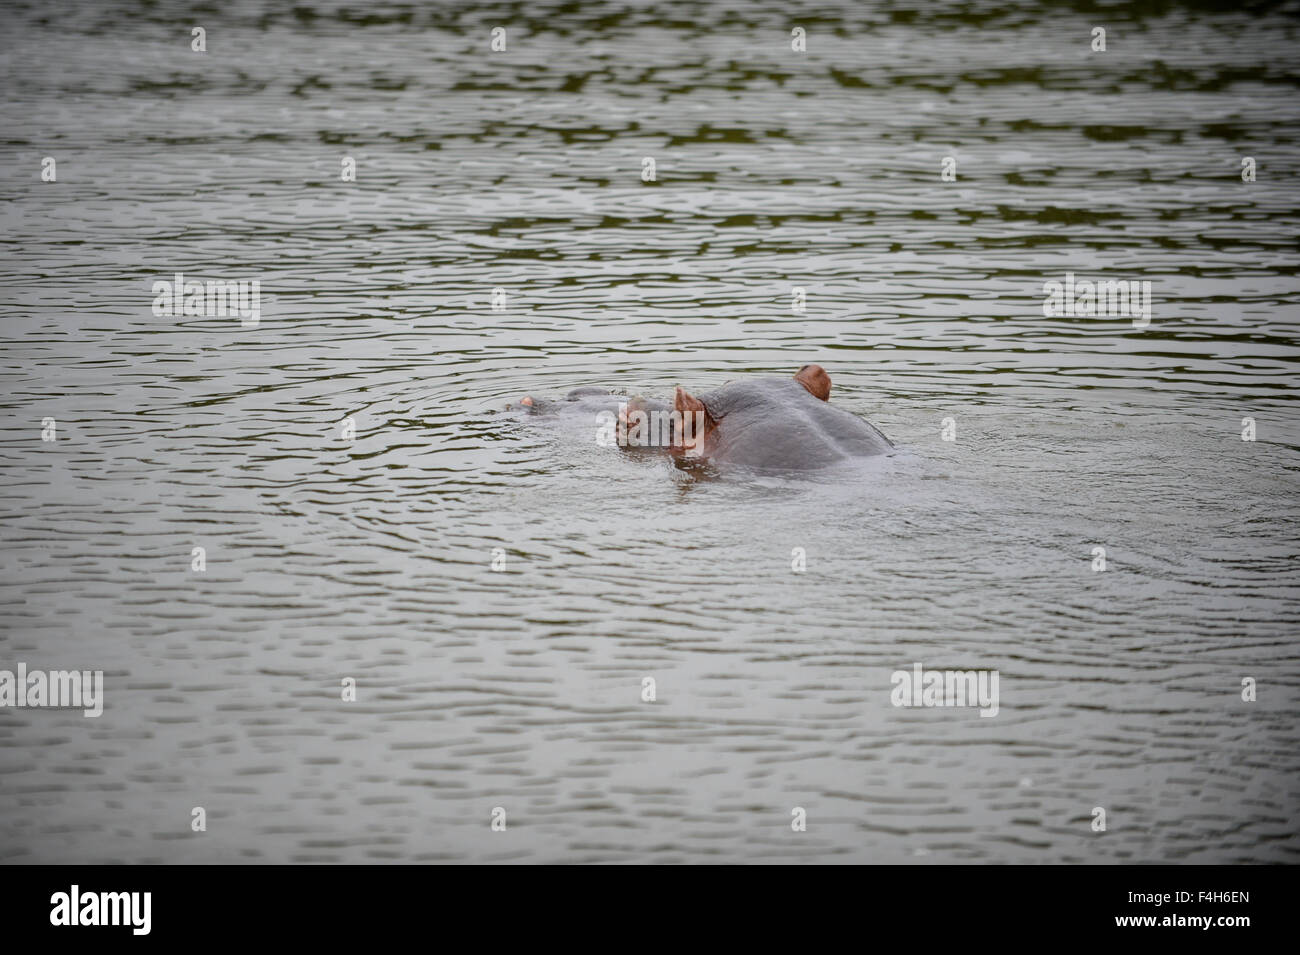 Hippo in the water Stock Photo